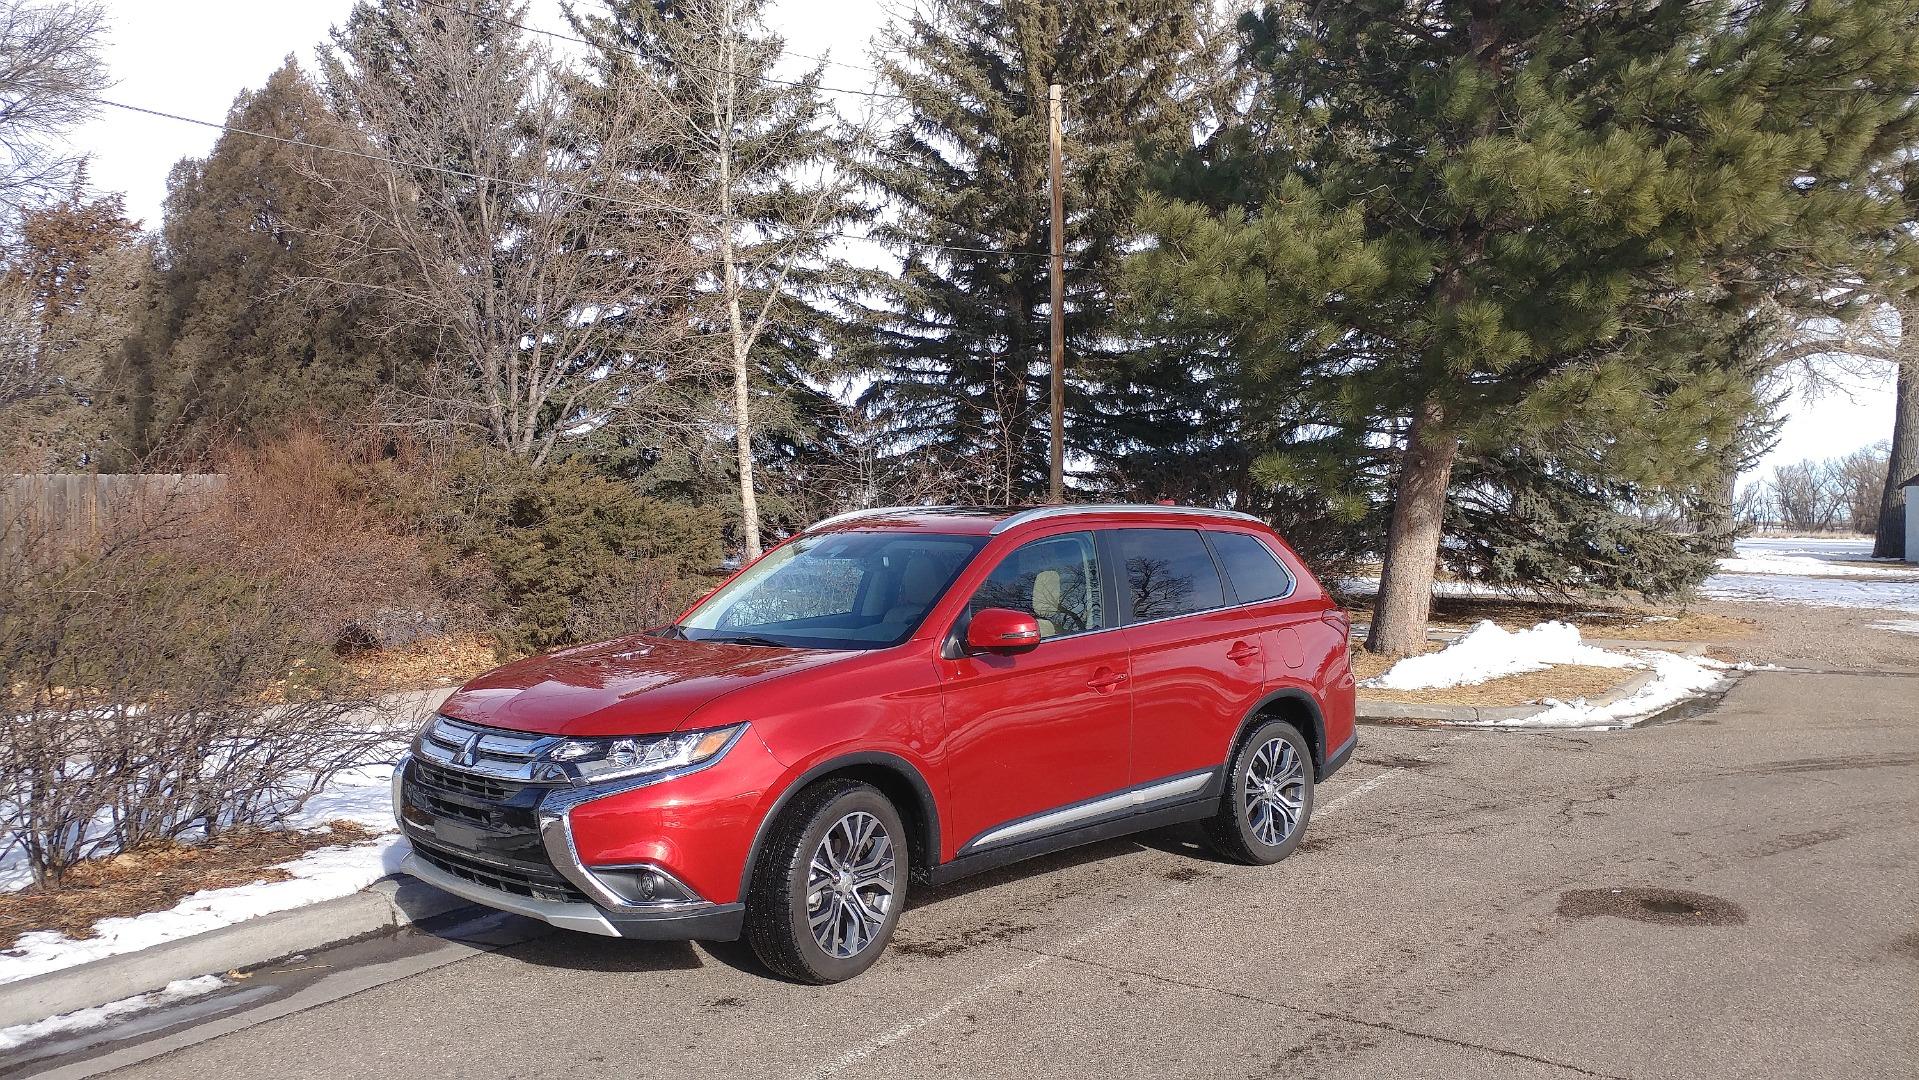 Review: 2018 Mitsubishi Outlander is a budget-minded 3-row that doesn't  cheap out